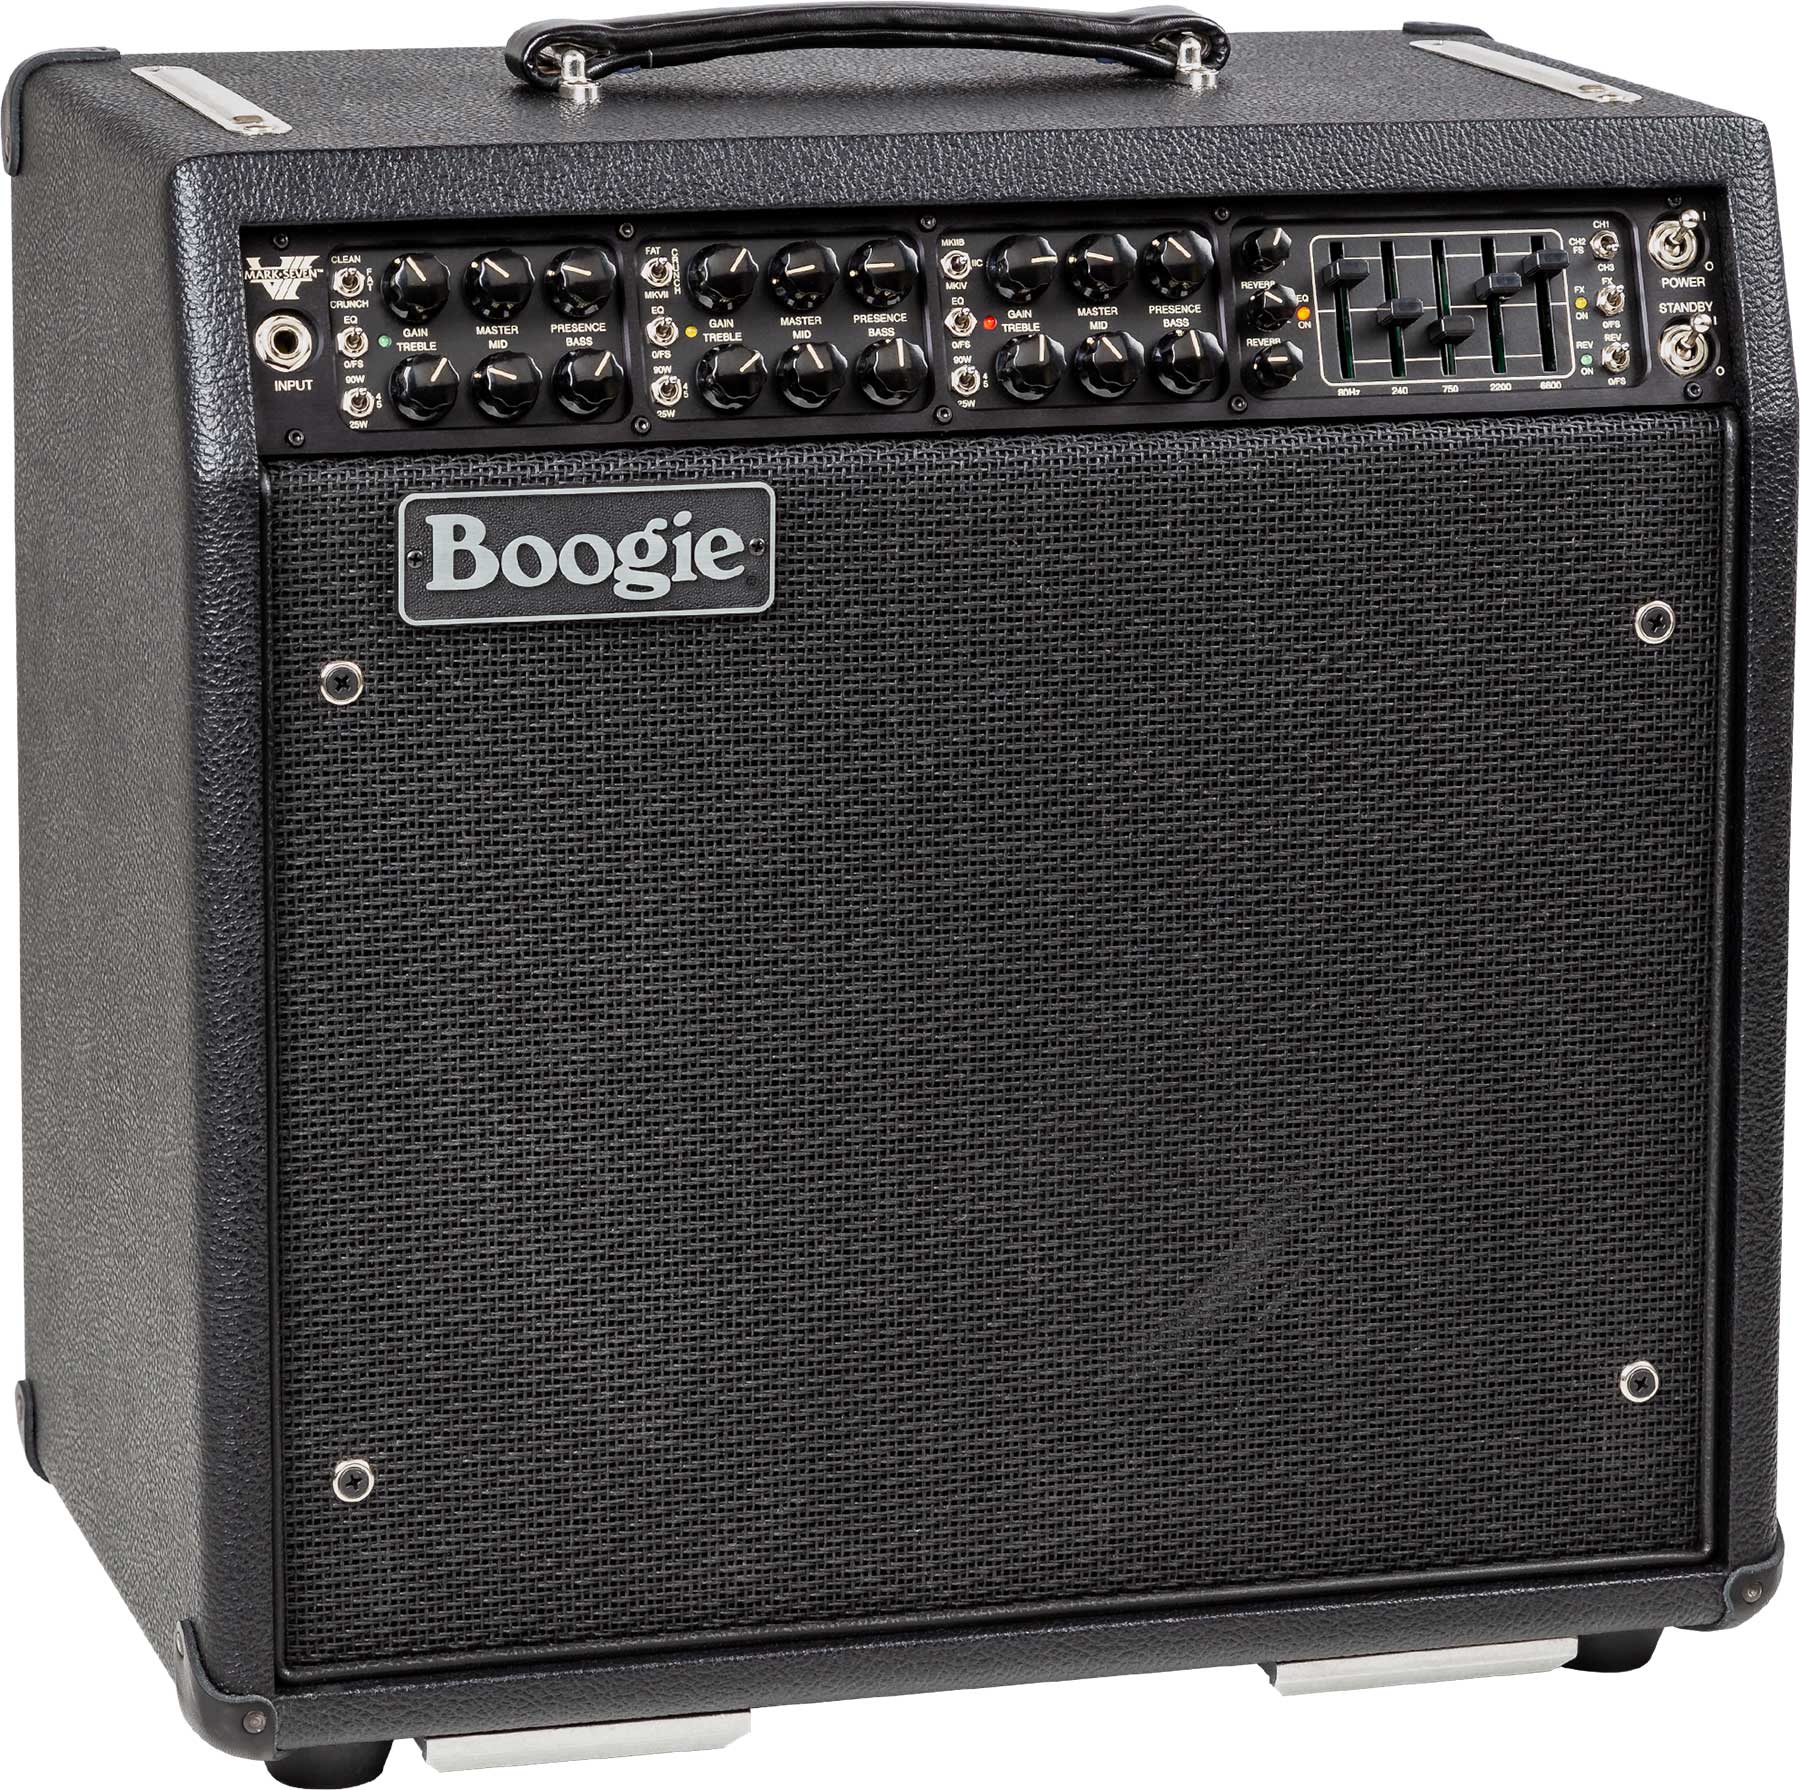 Mesa Boogie Mark Vii 1x12 Combo 25/45/90w 6l6 Black - Electric guitar combo amp - Variation 1